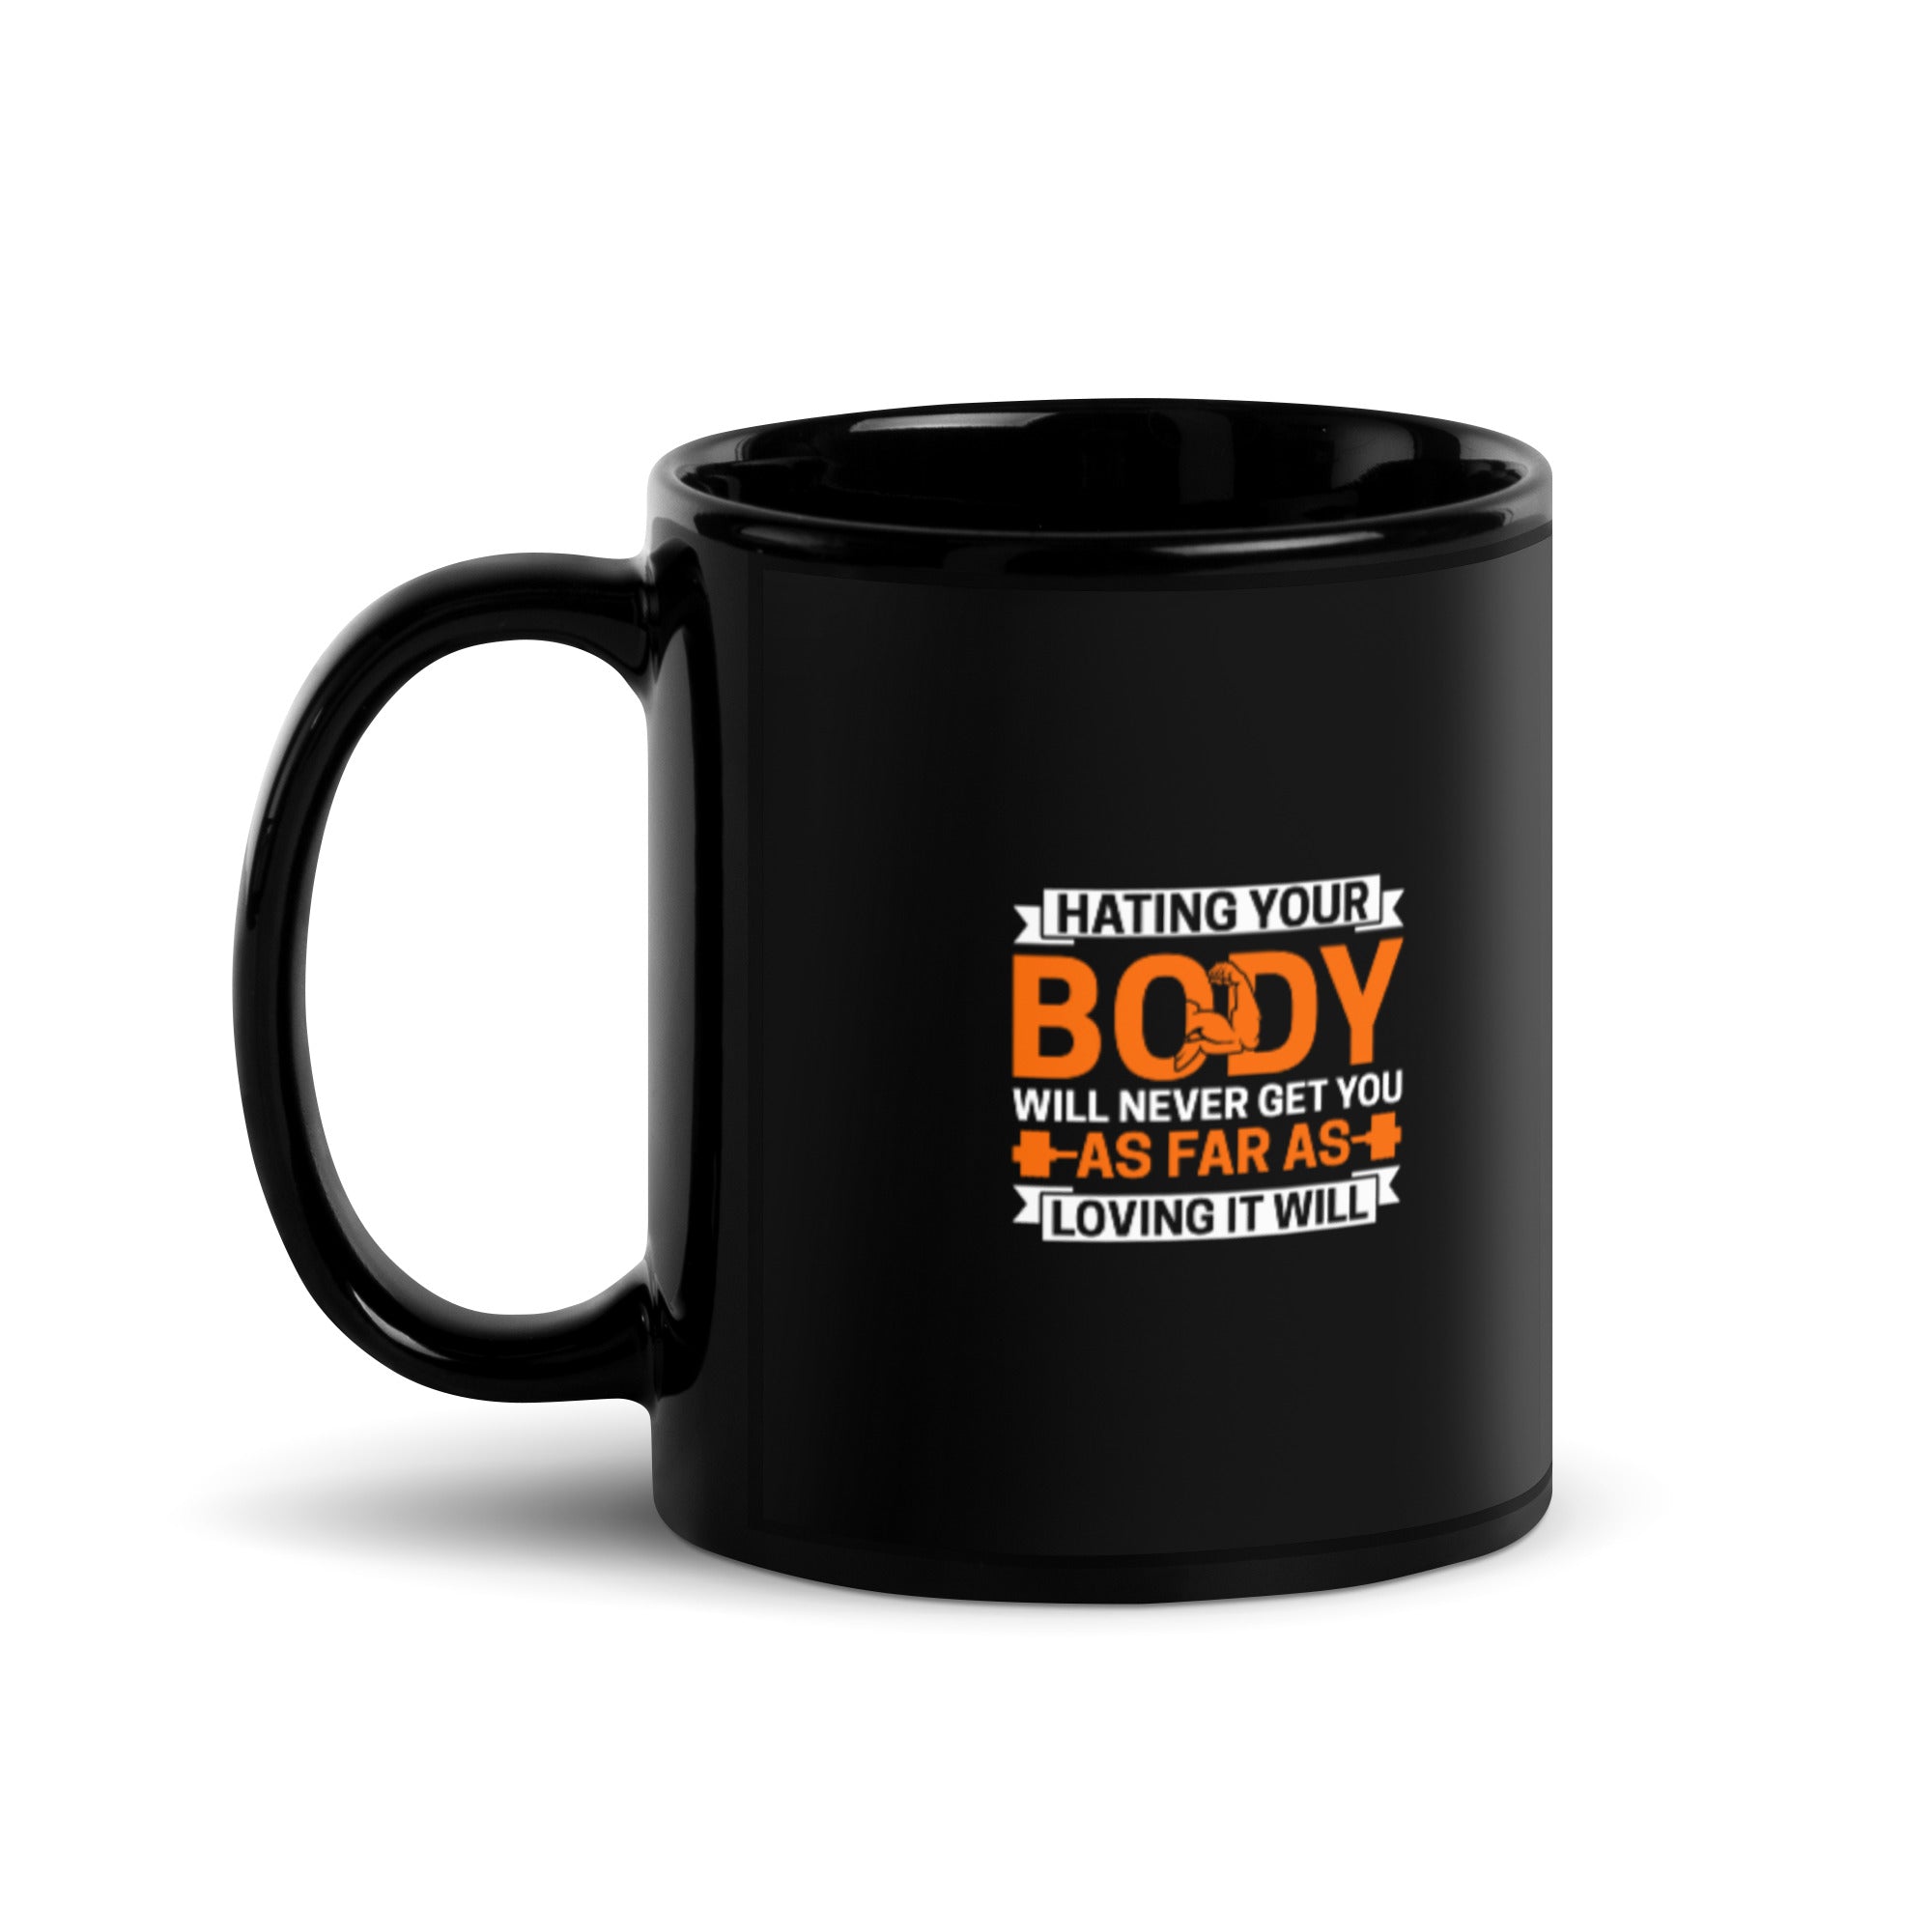 Hating Your Body Will Never Get You Far - Black Glossy Mug